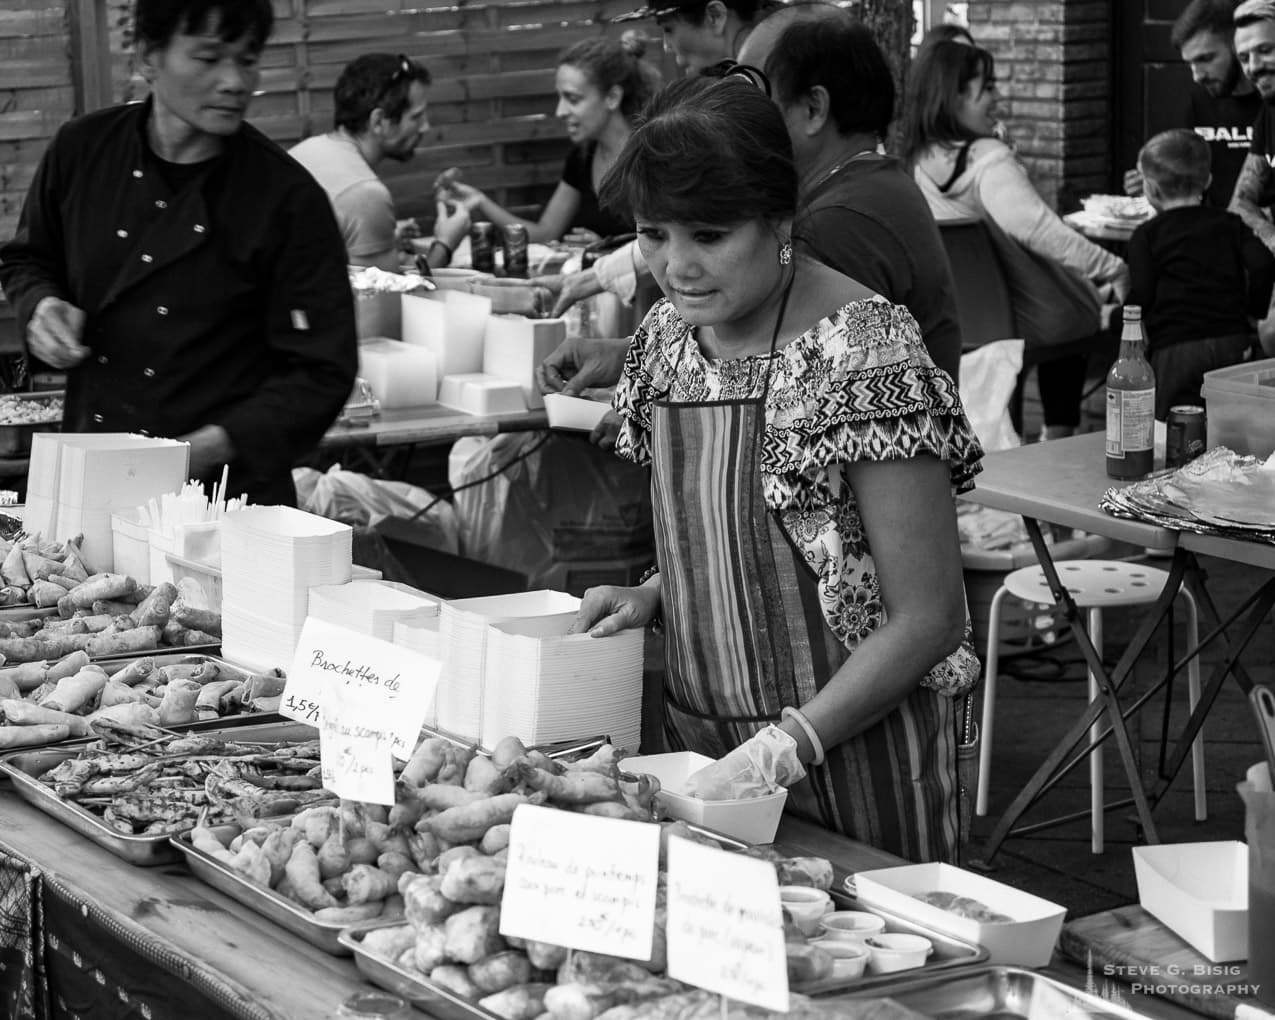 Photo 24/32 of a series of black and white photographs from the 2018 Grande Braderie D'Ixelles sidewalk sale and street festival in Brussels, Belgium.